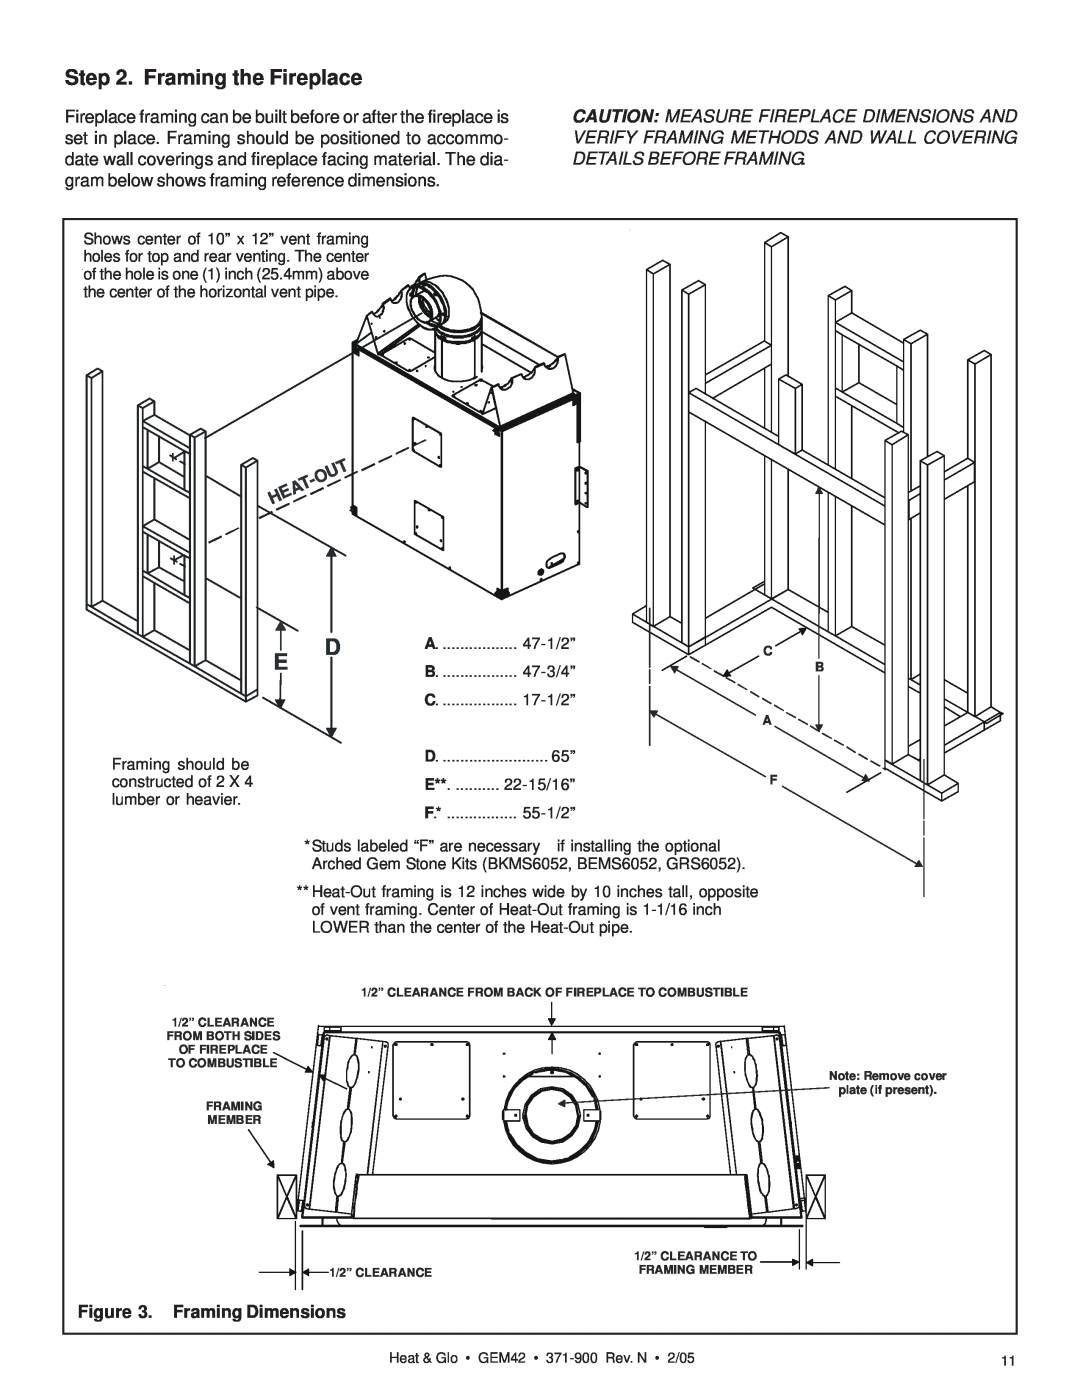 Heat & Glo LifeStyle GEM42 manual Framing the Fireplace, Framing Dimensions, 47-1/2”, 47-3/4”, 17-1/2”, 22-15/16”, 55-1/2” 